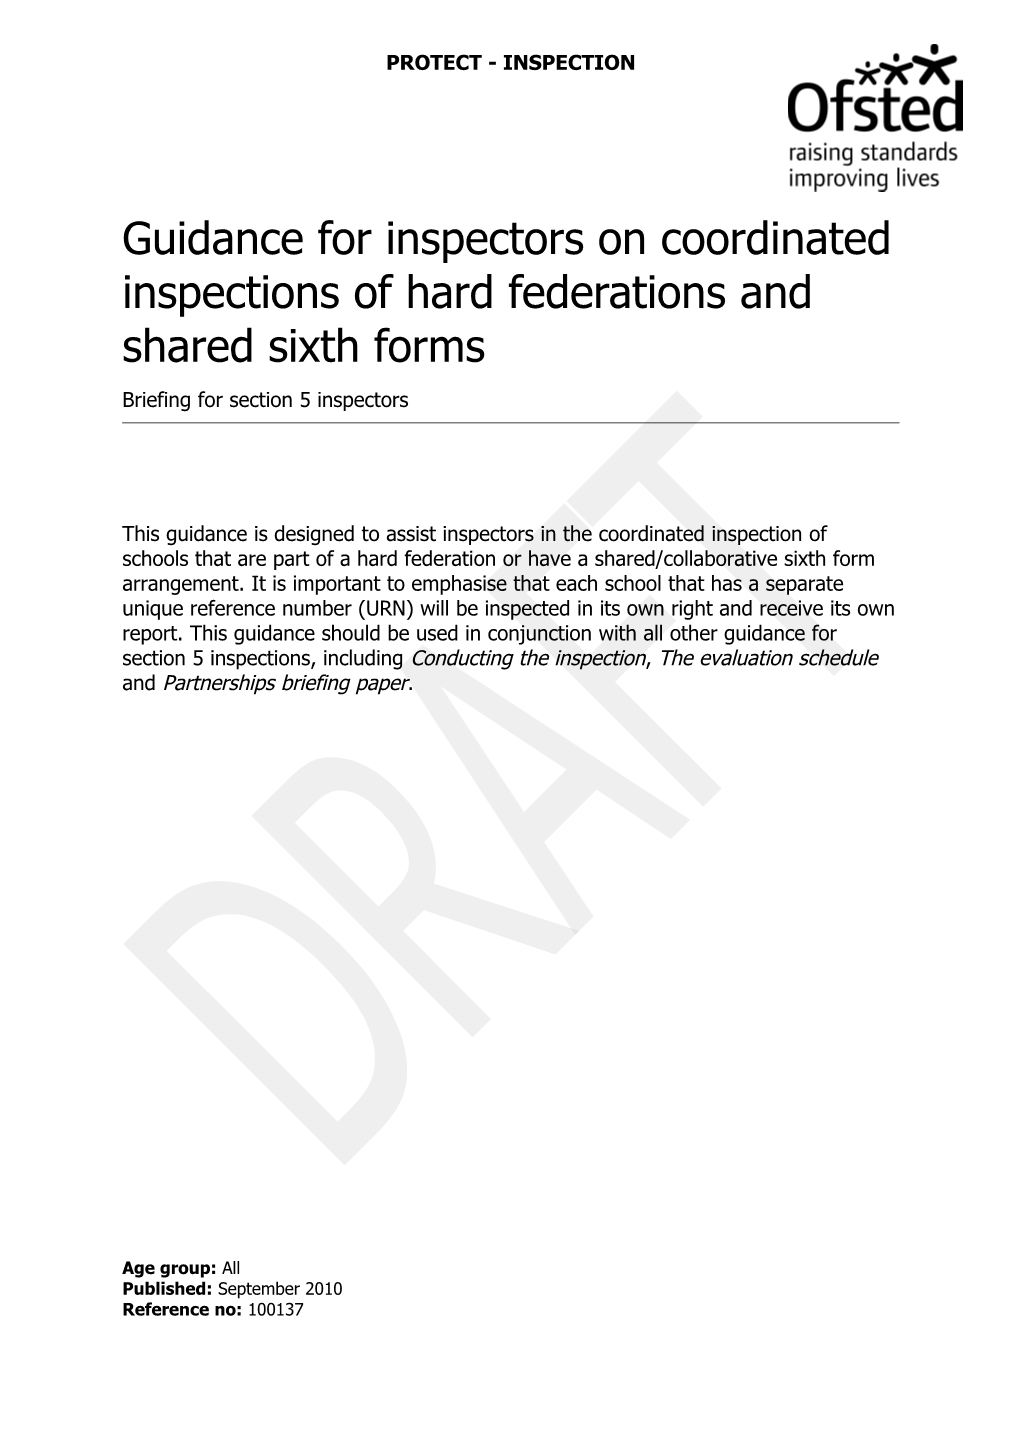 Guidance for Inspectors on Coordinated Inspections of Hard Federations and Shared Sixth Forms